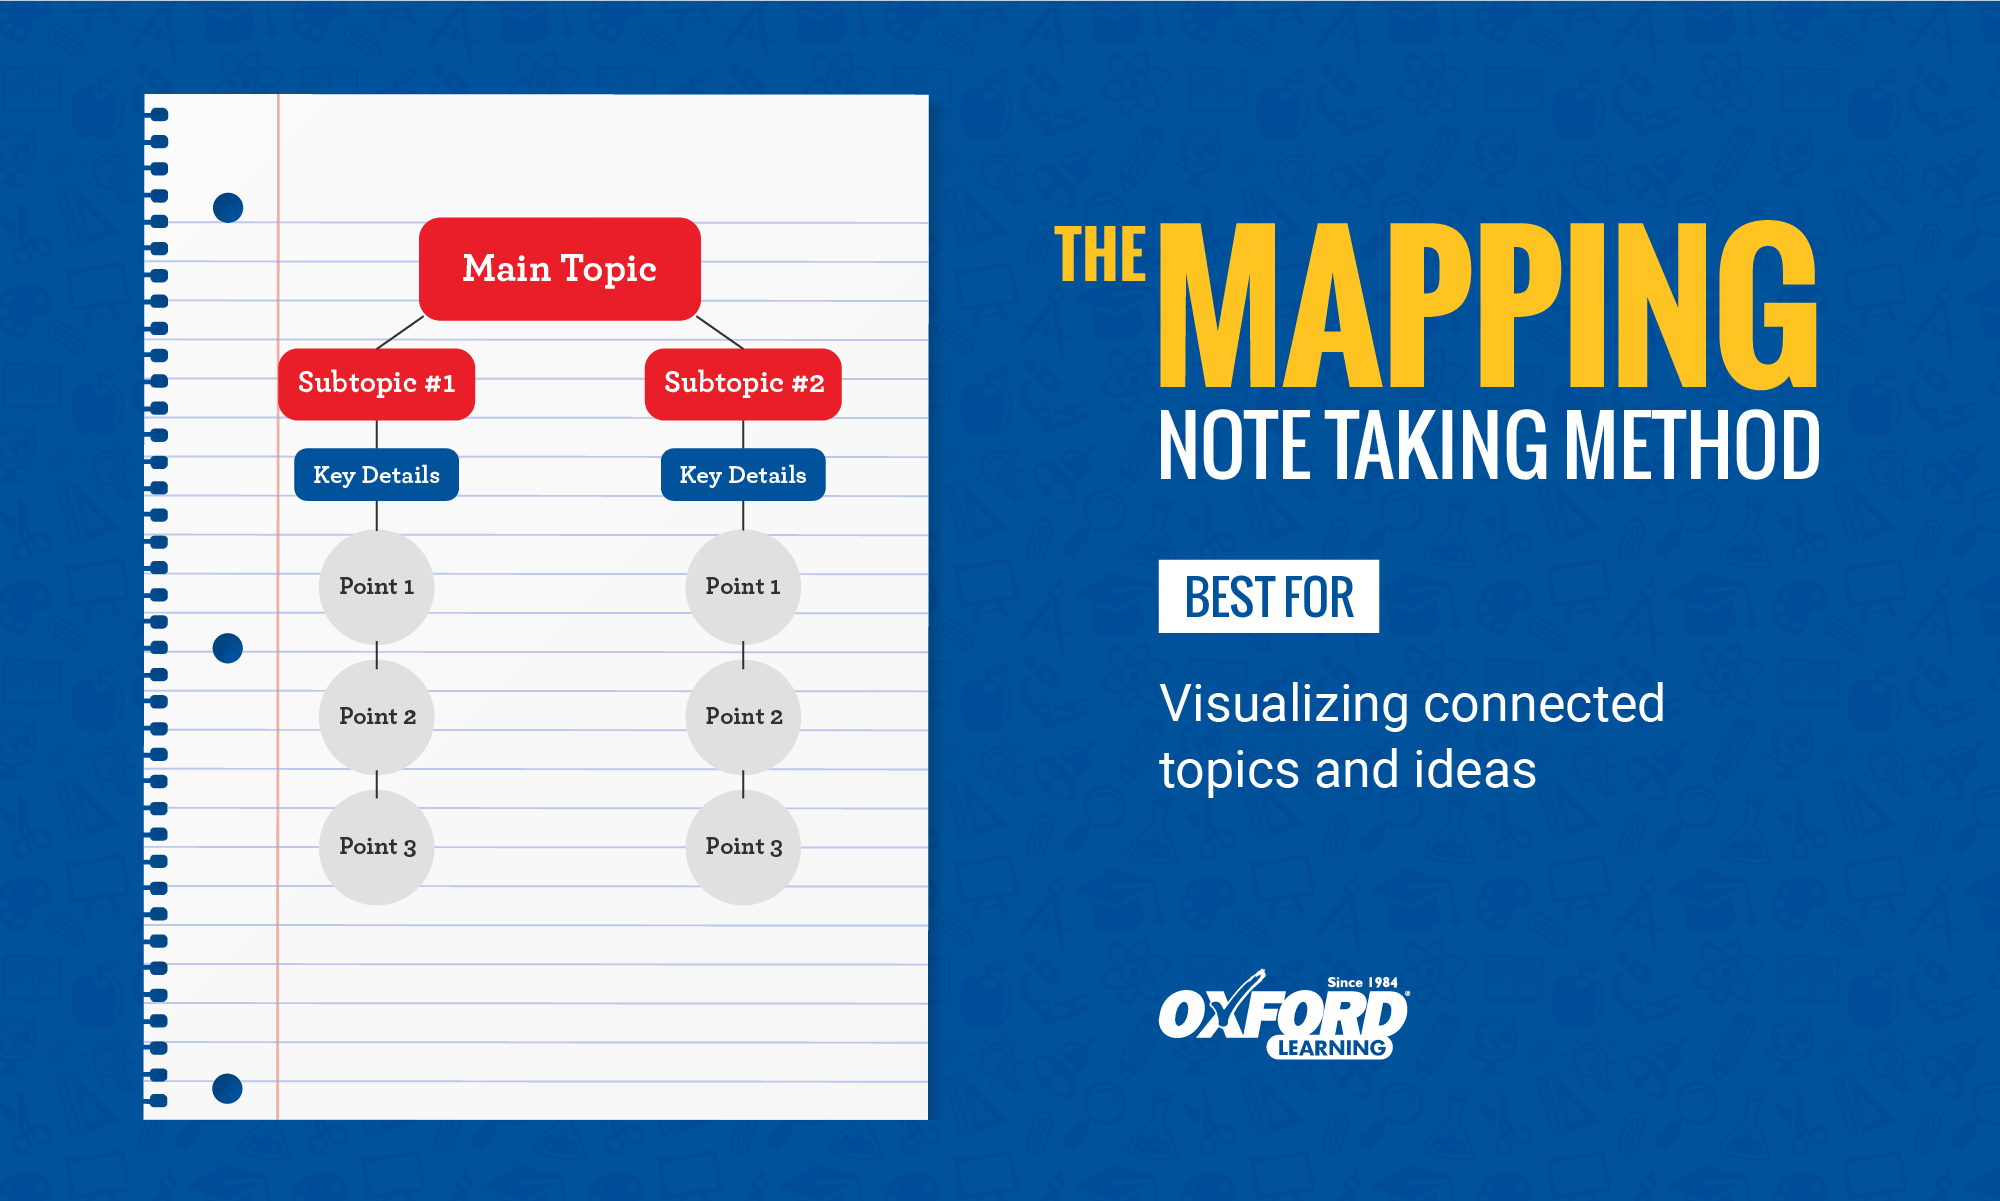 Example page set up for the Mapping note taking method